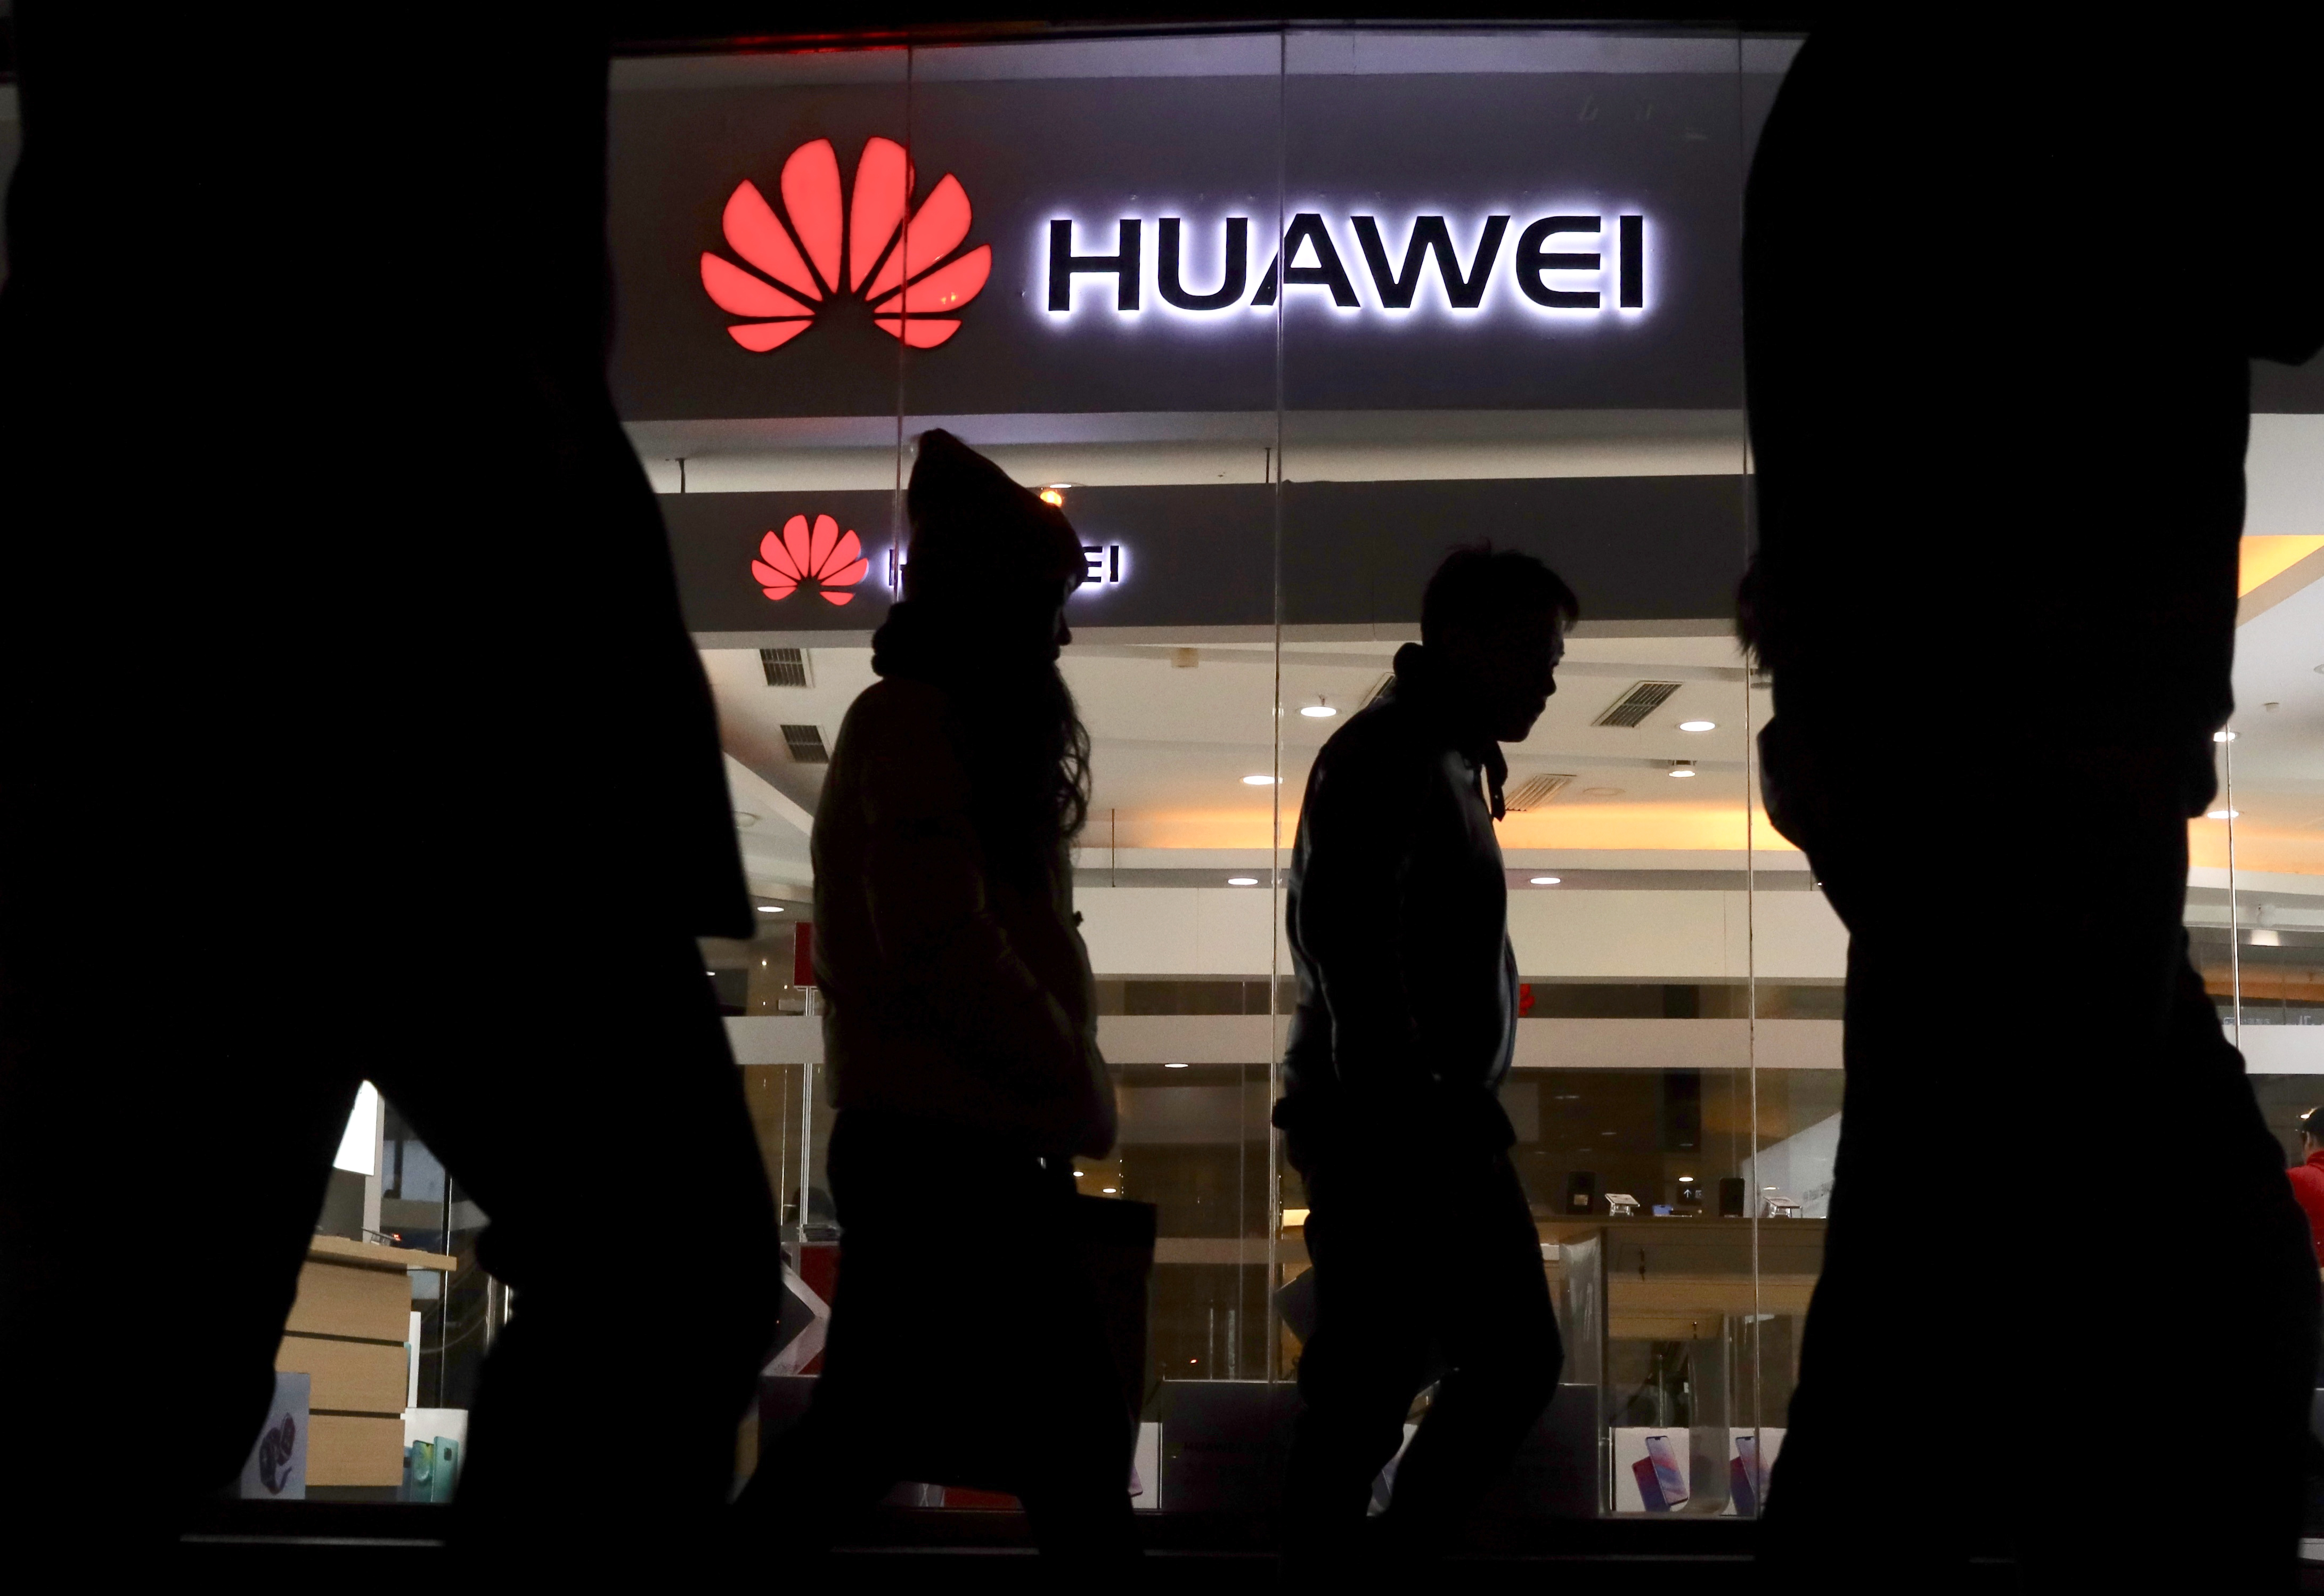 uhf jammer | Executive’s Arrest, Security Worries Stymie Huawei’s Reach